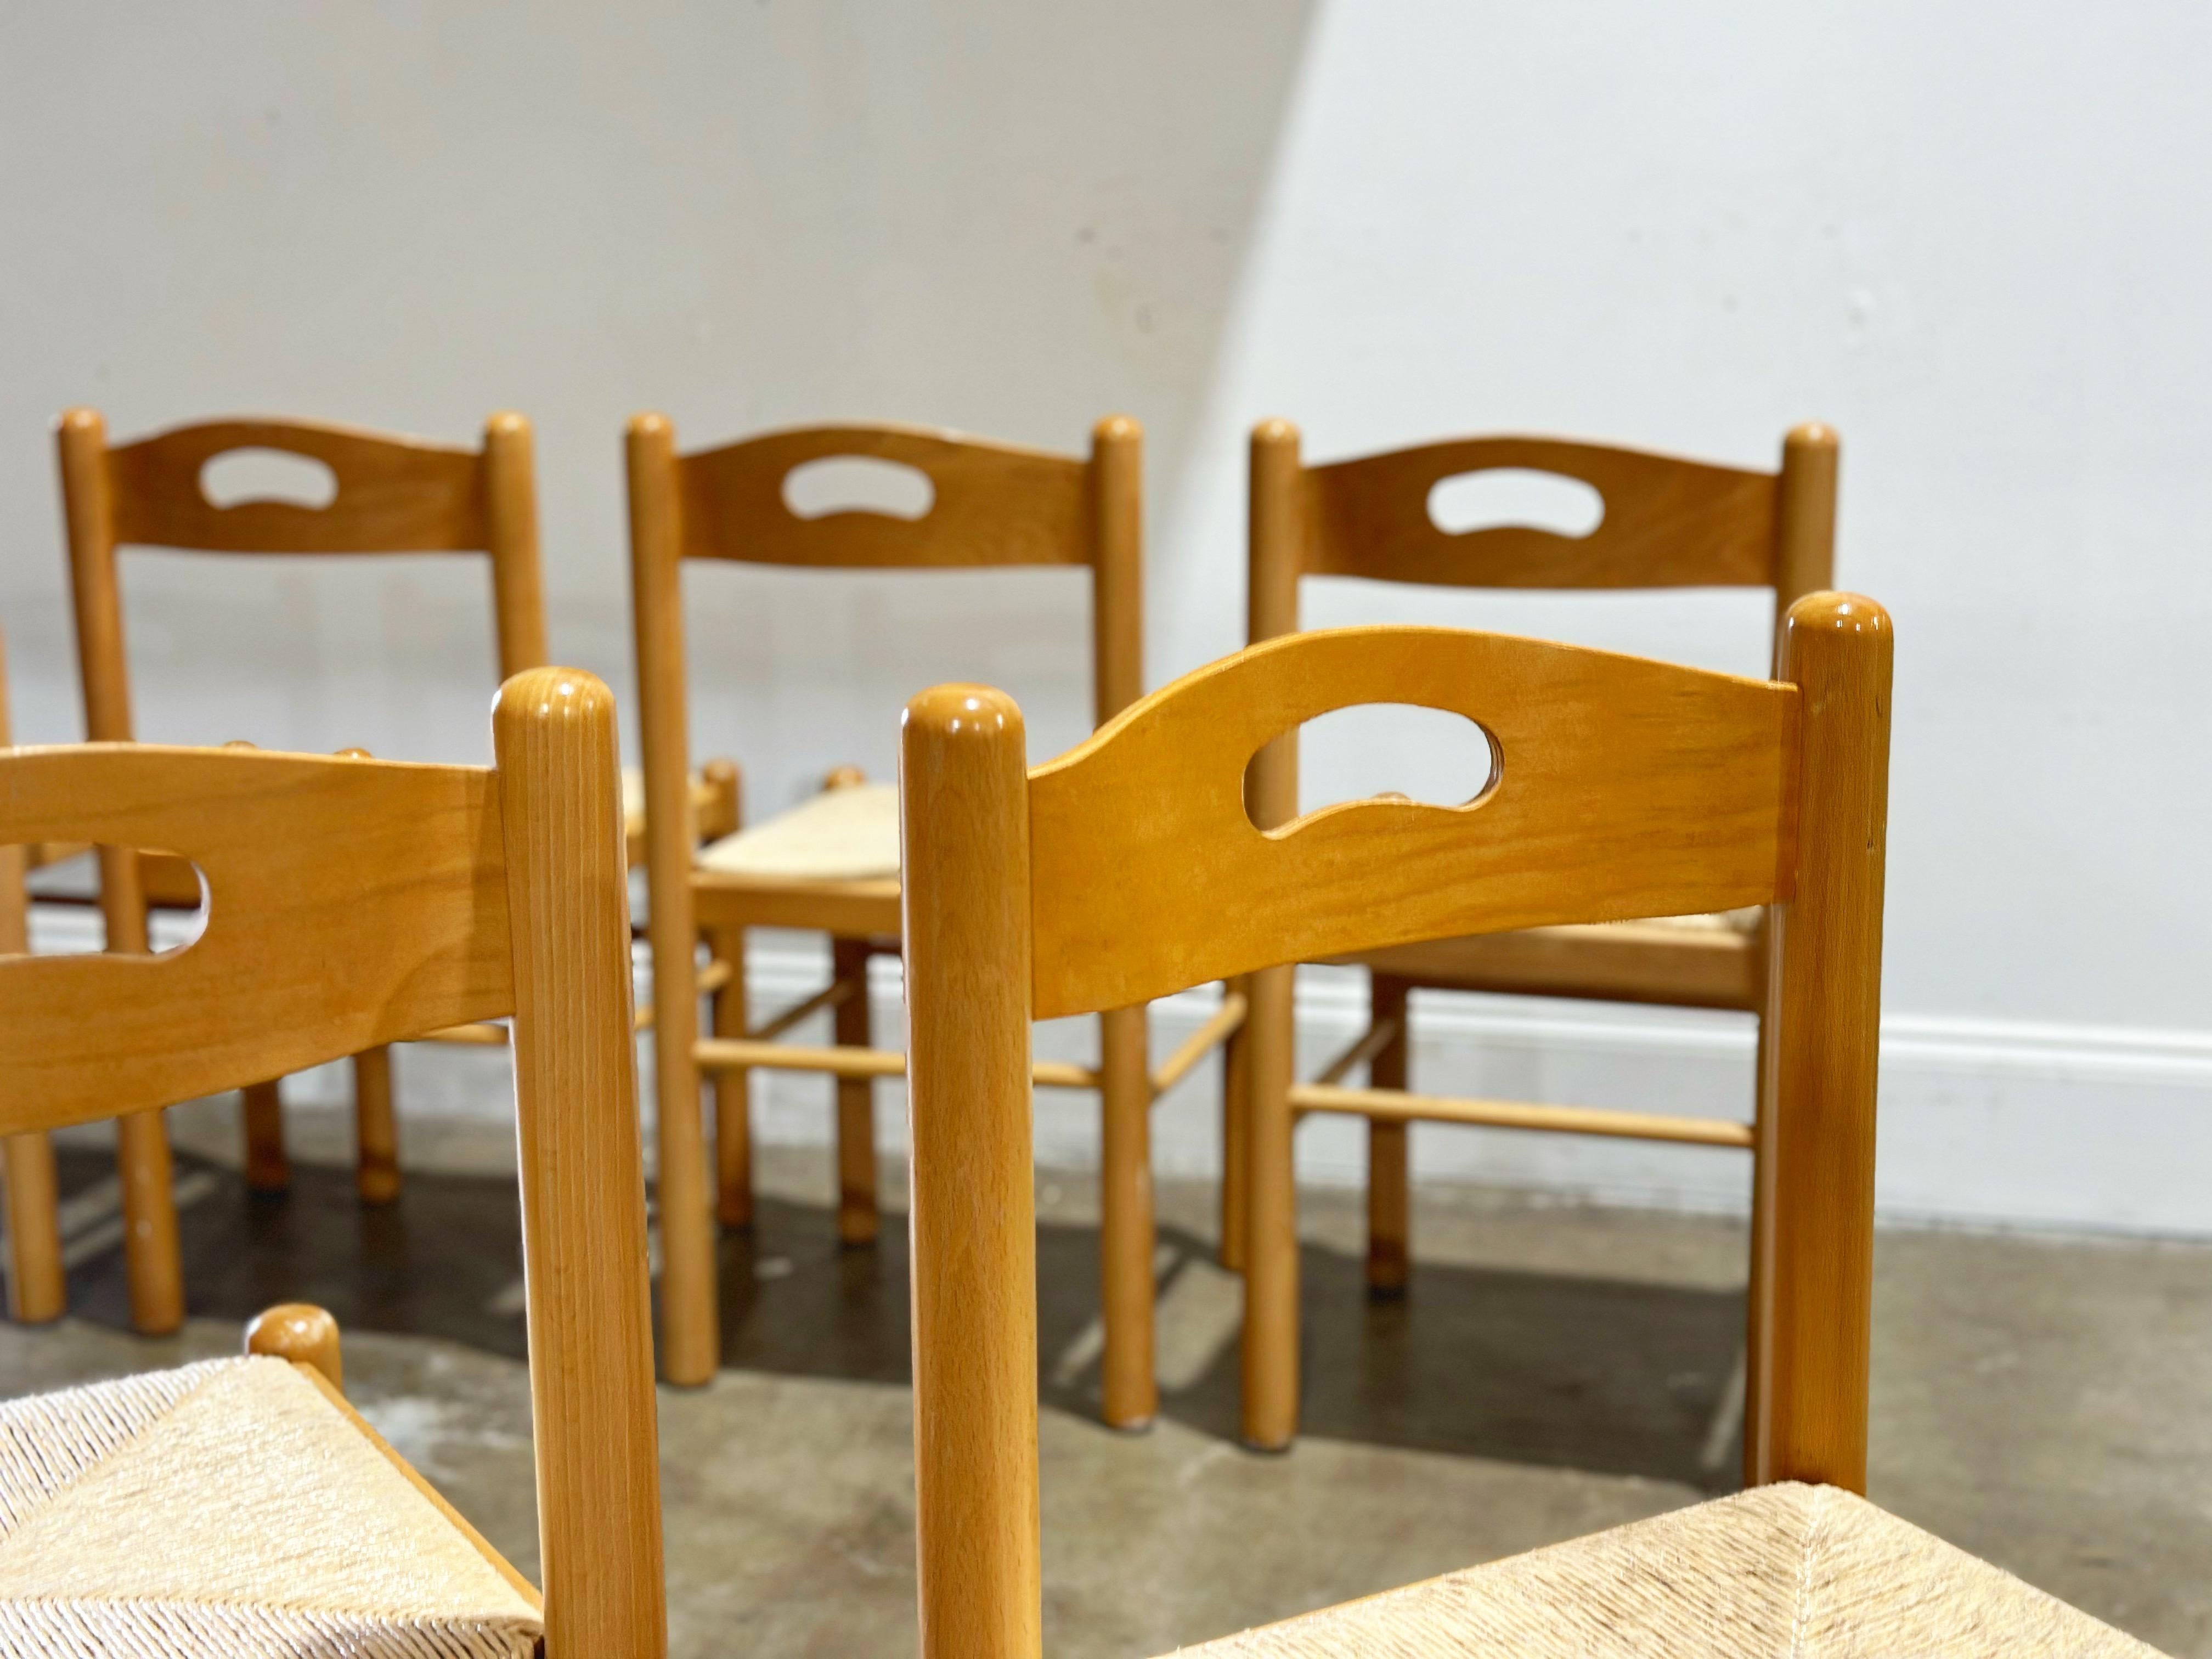 Vintage organic / post modern dining chairs, Italy circa 1980s. Set of six (6).
Solid birch frames with woven rush seats.

Excellent original condition - this set looks to have been hardly, if ever used.
Frames are sound and sturdy - rush seats are